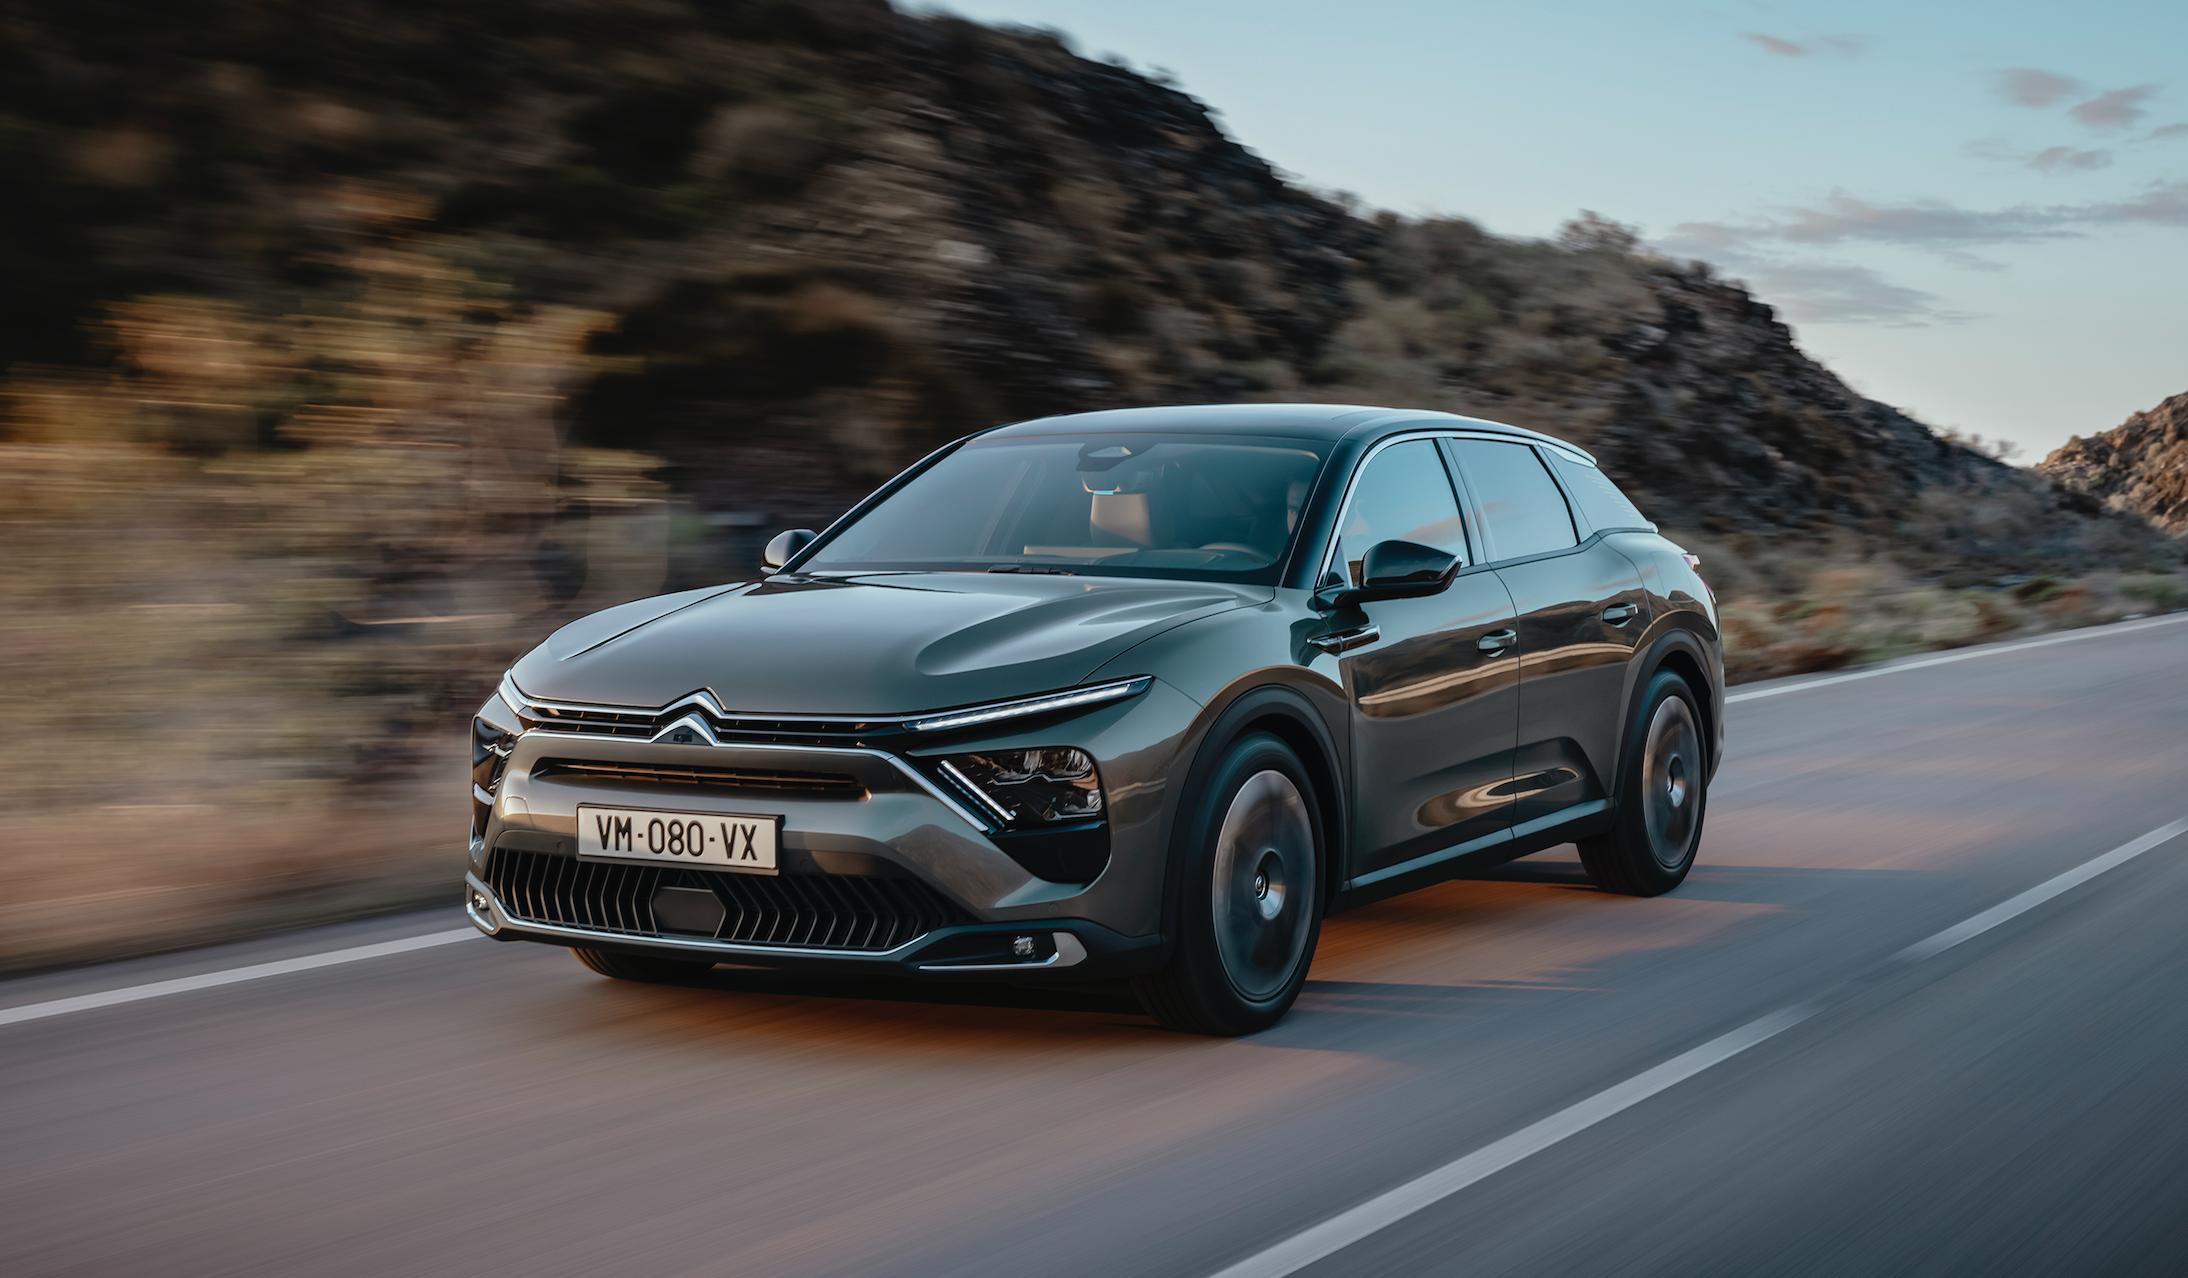 Citroën’s new flagship is the C5 X